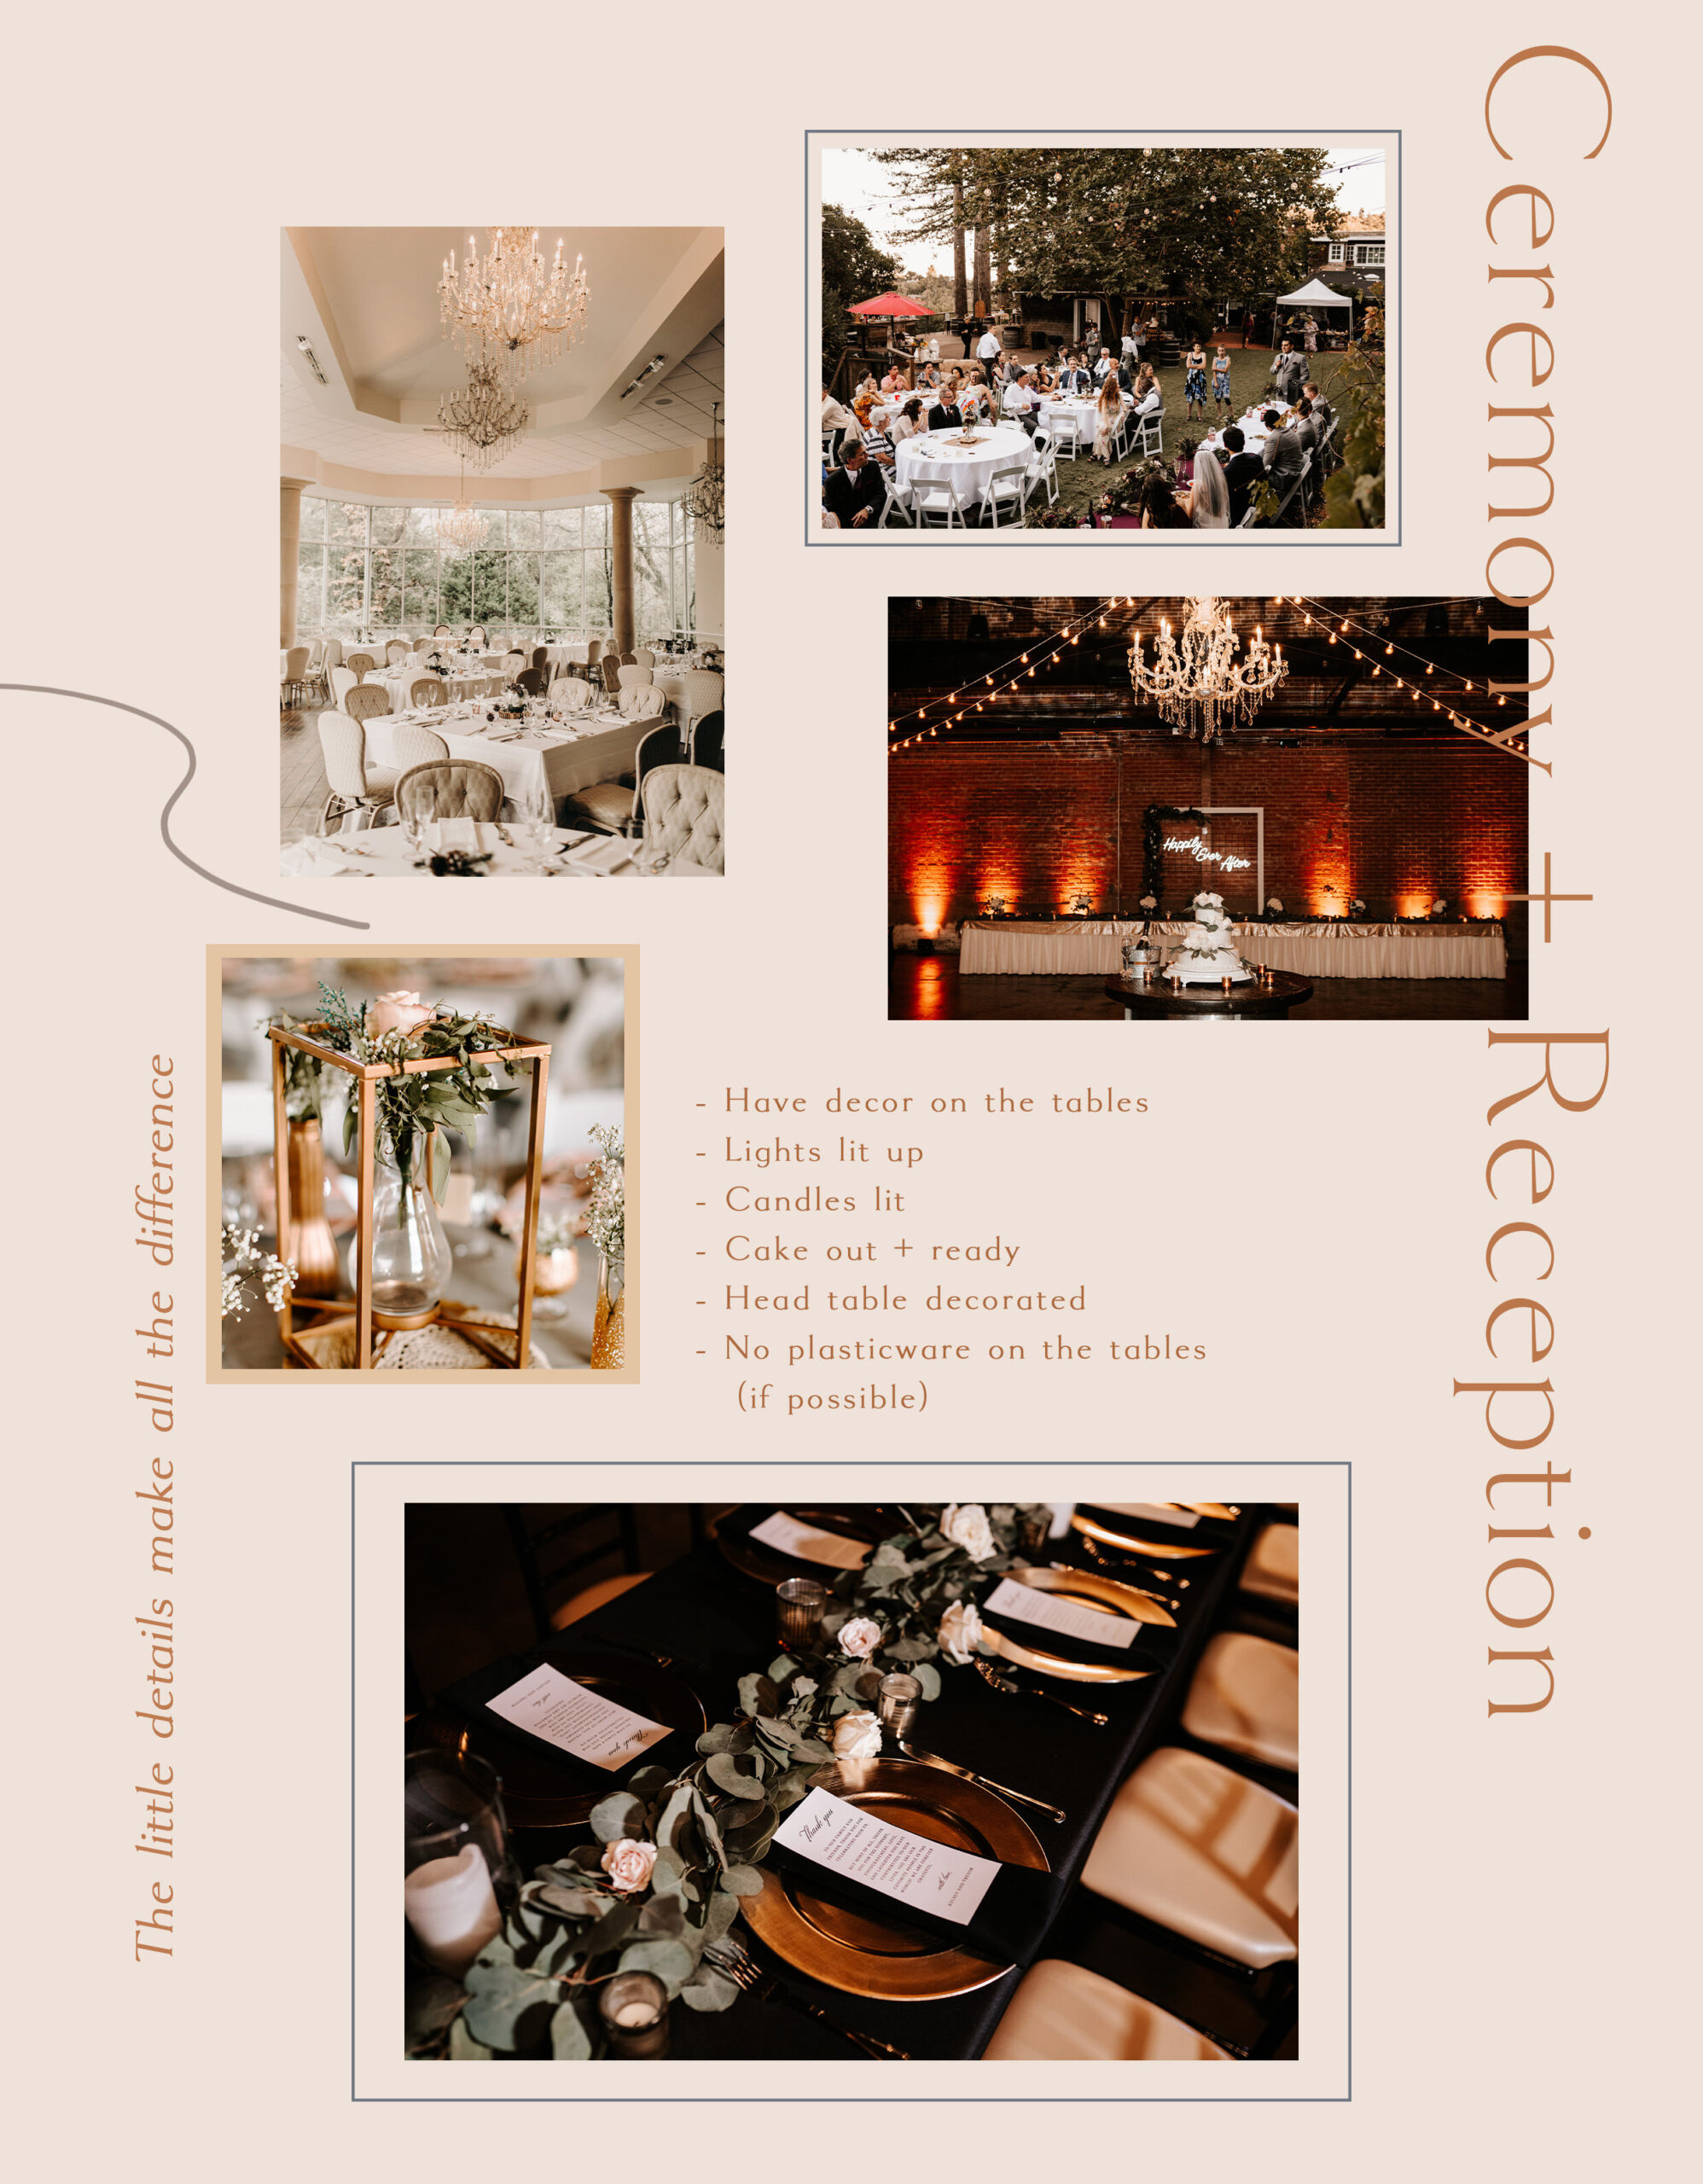 BLP Wedding Day Details Style Guide (DONE)_0016_Pg 14 - Ceremony + Reception Examples.jpg